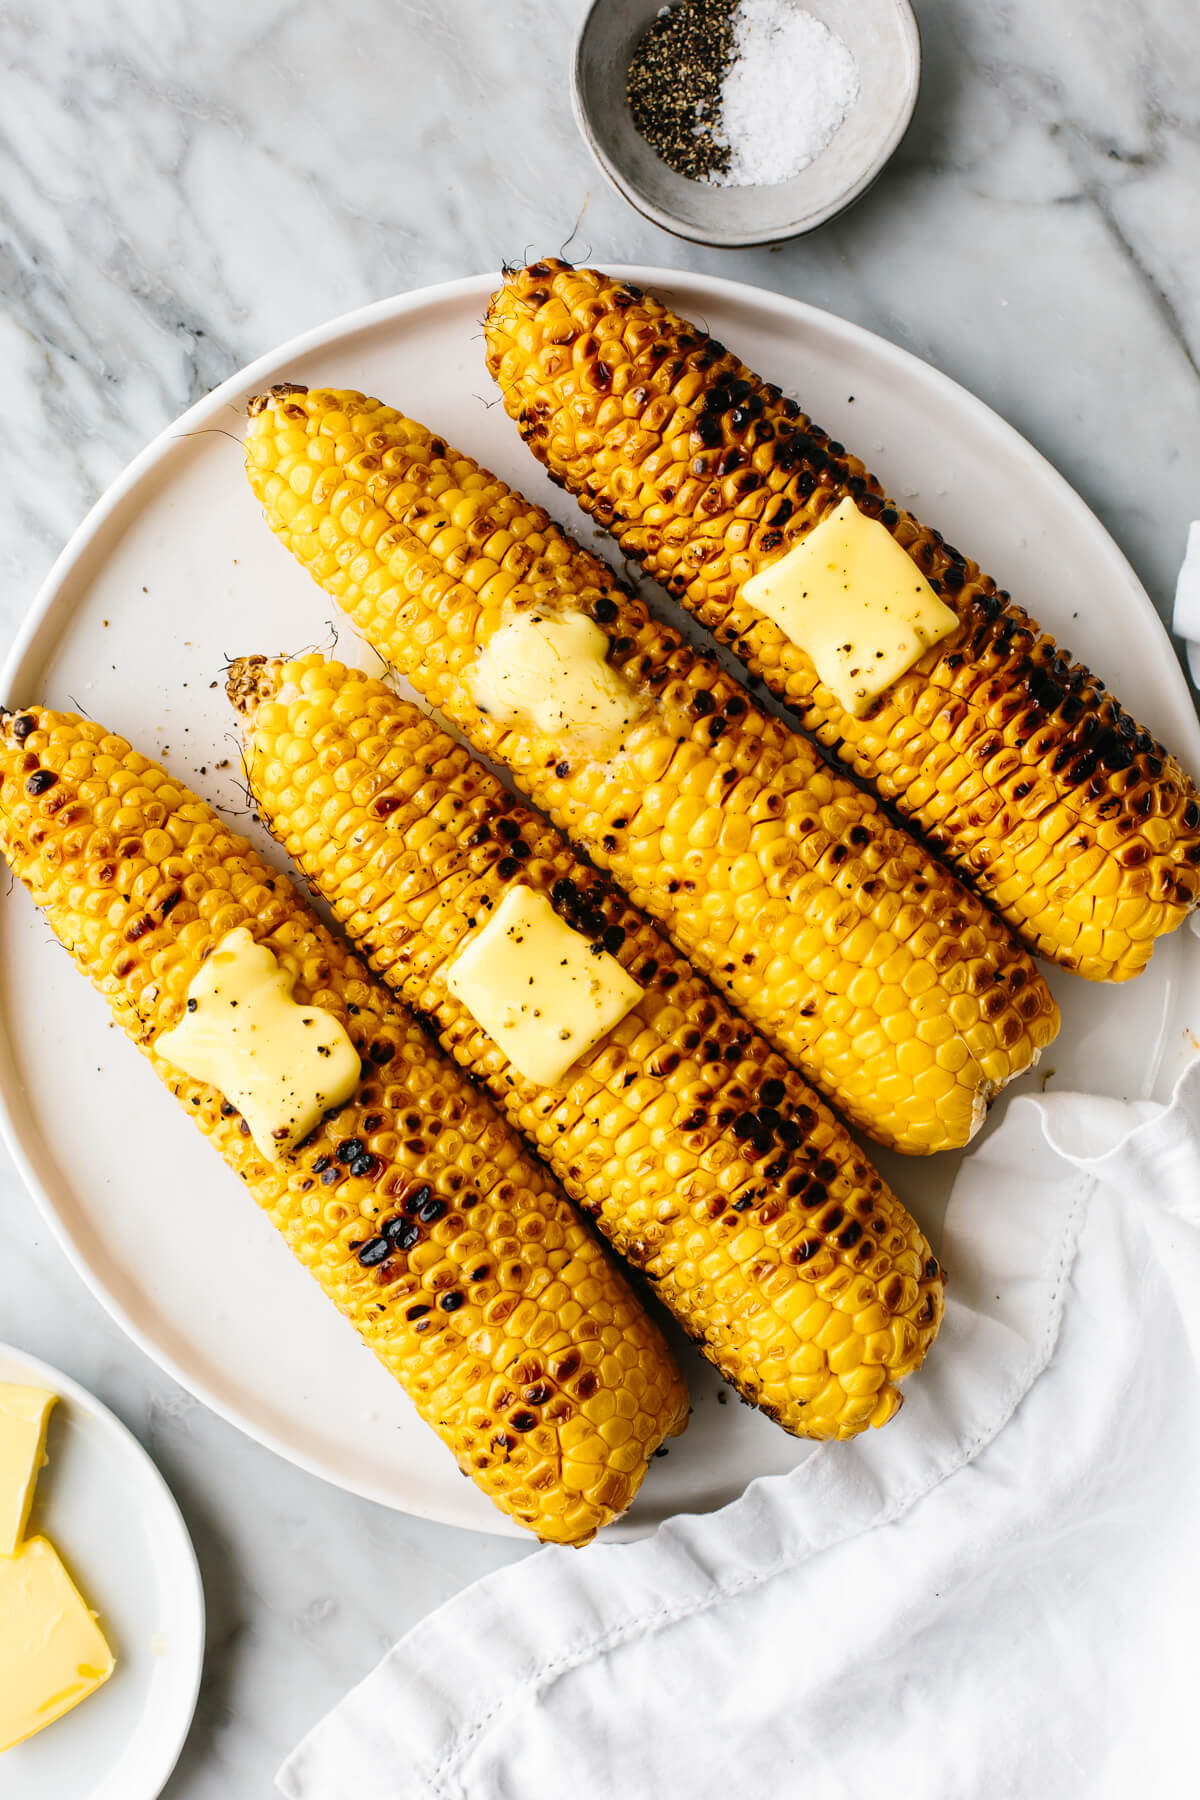 Grilled corns on the cobb on a white plate next to butter.